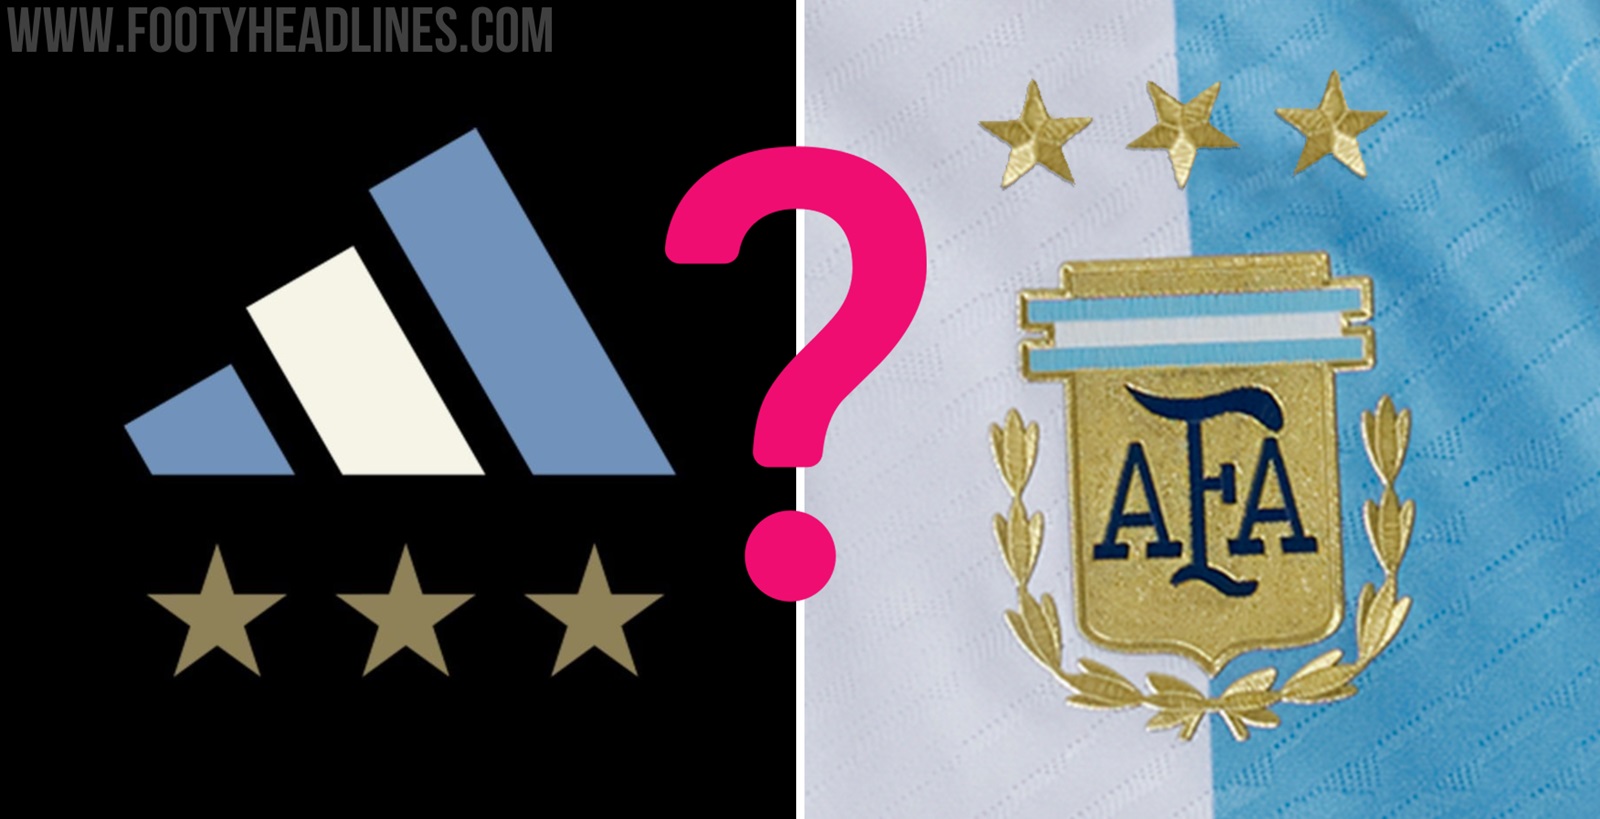 Adidas Argentina 3-Star Kit Full Release - Now Available